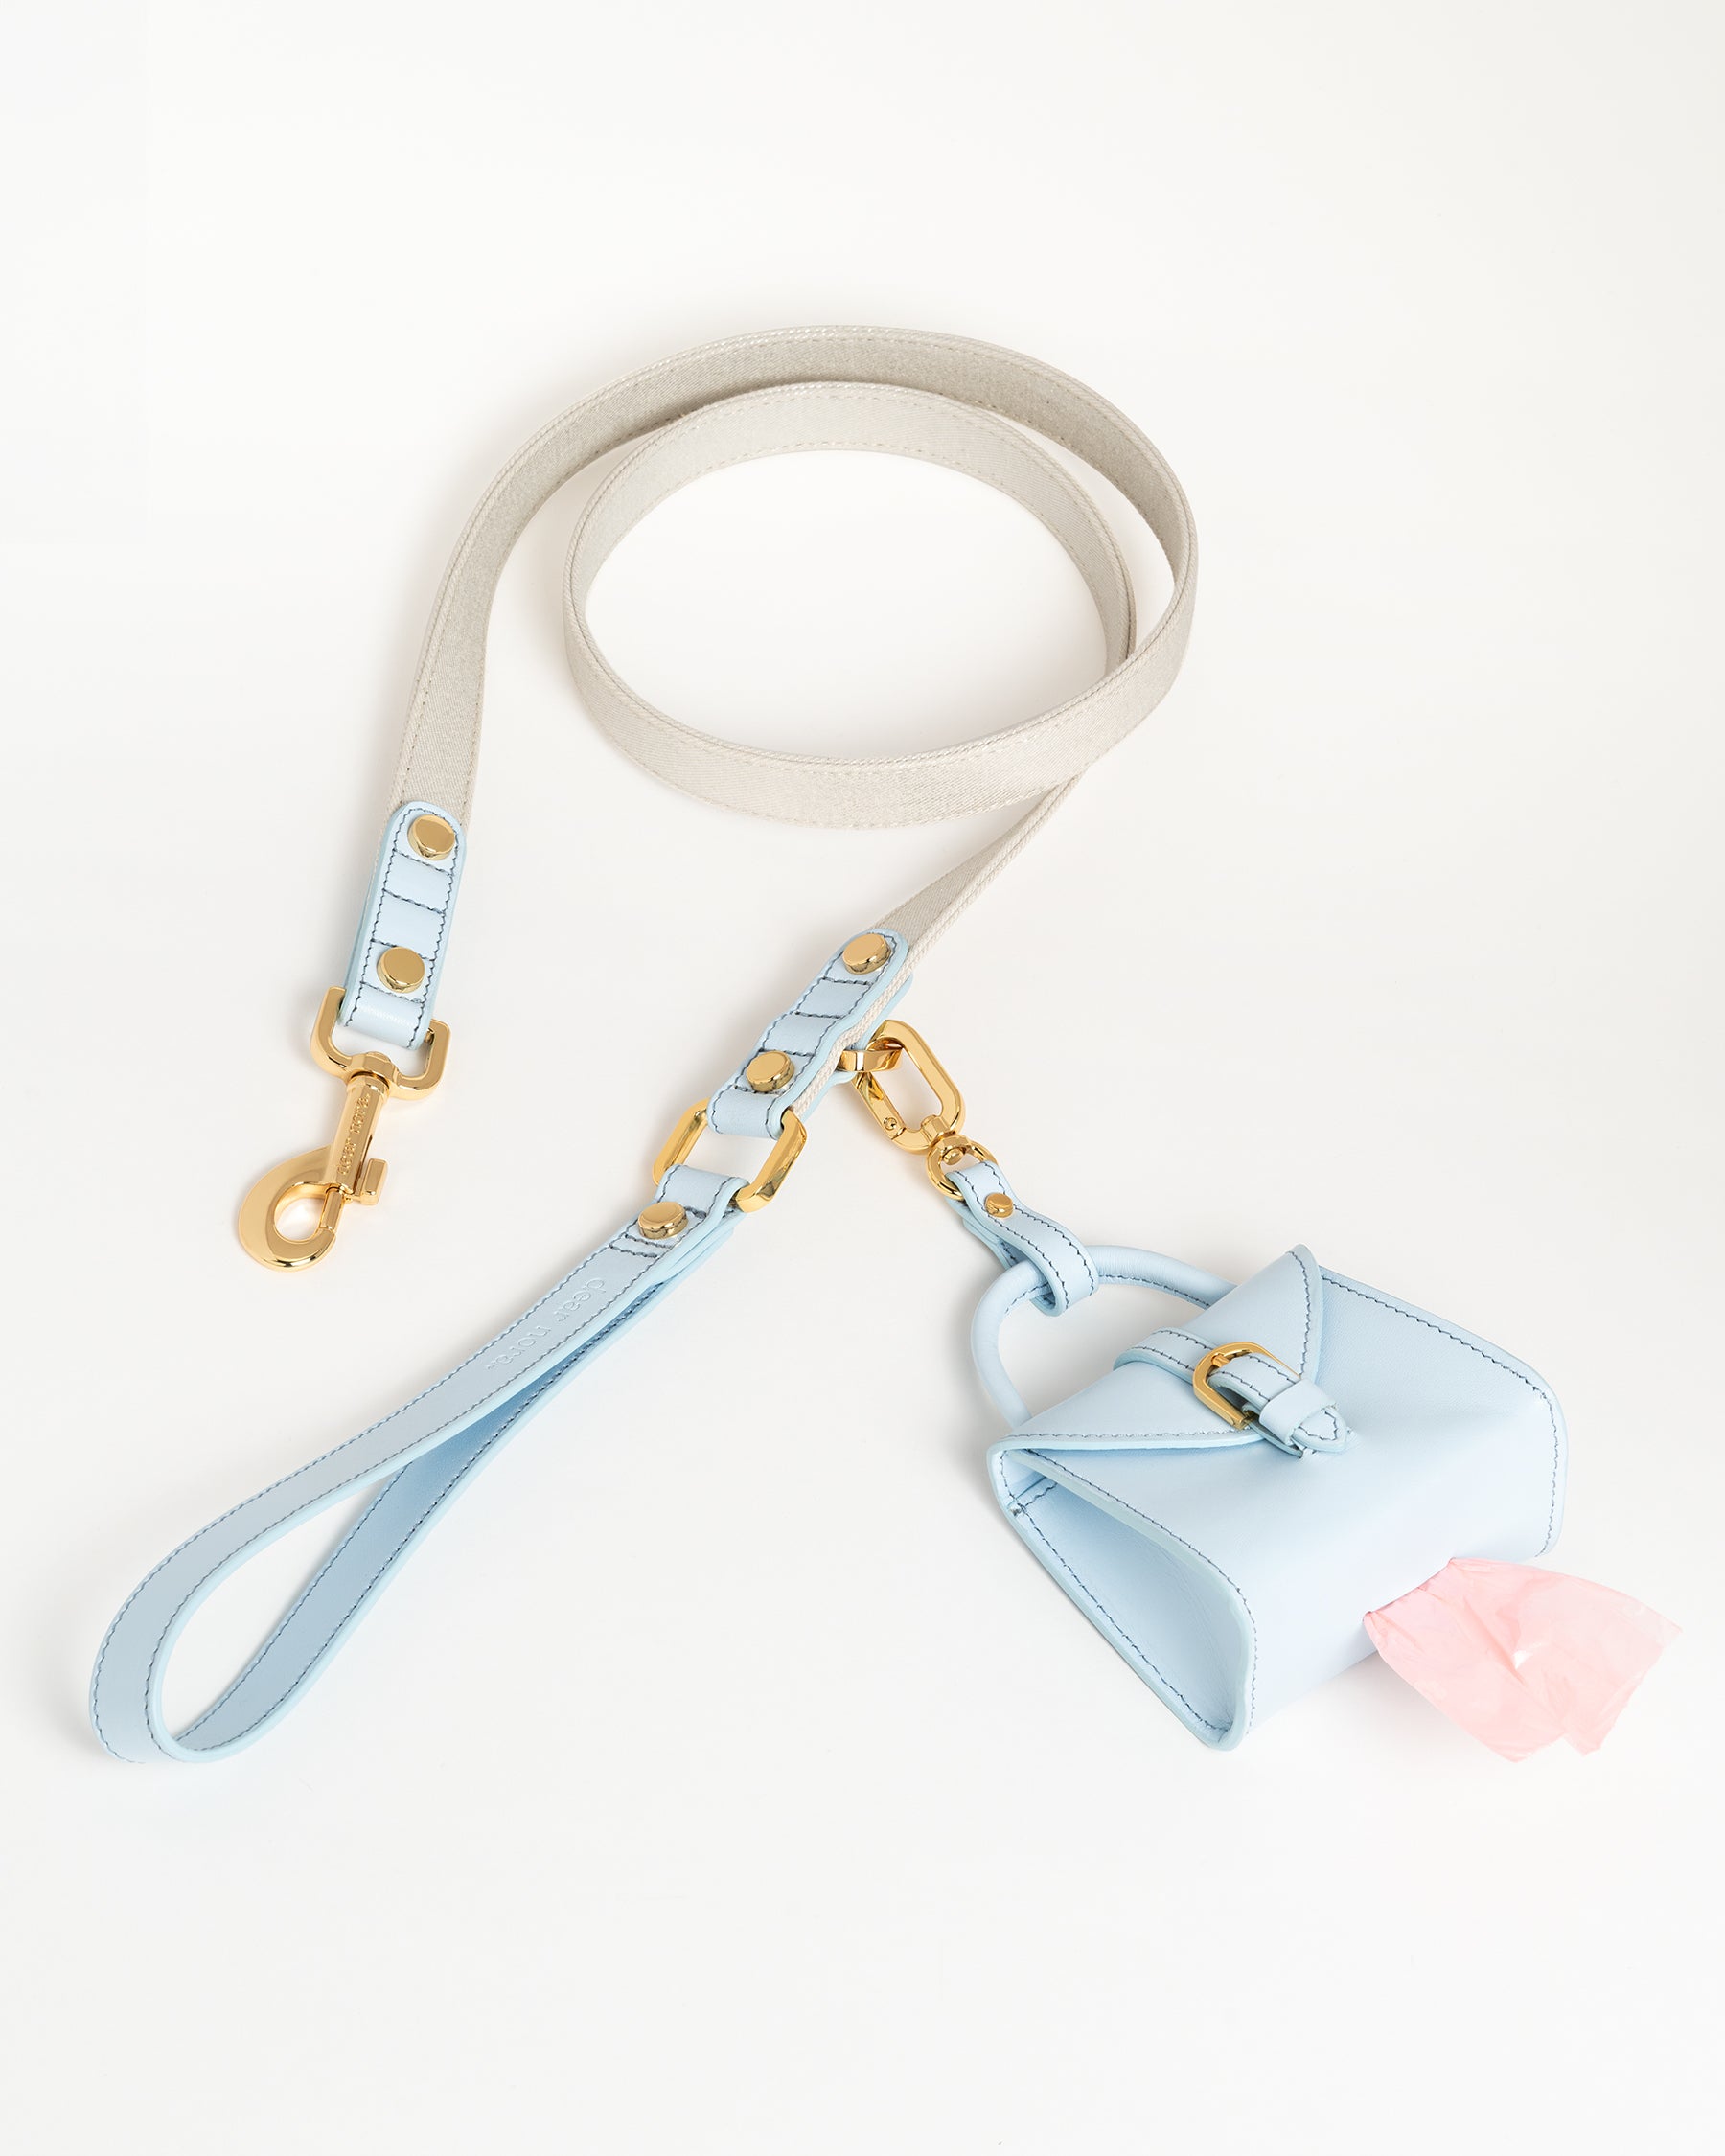 Dear Nora Sapphire dog leash and poop bag holder - baby blue leather, cream sparkle fabric and 24k plated hardware - top down shot